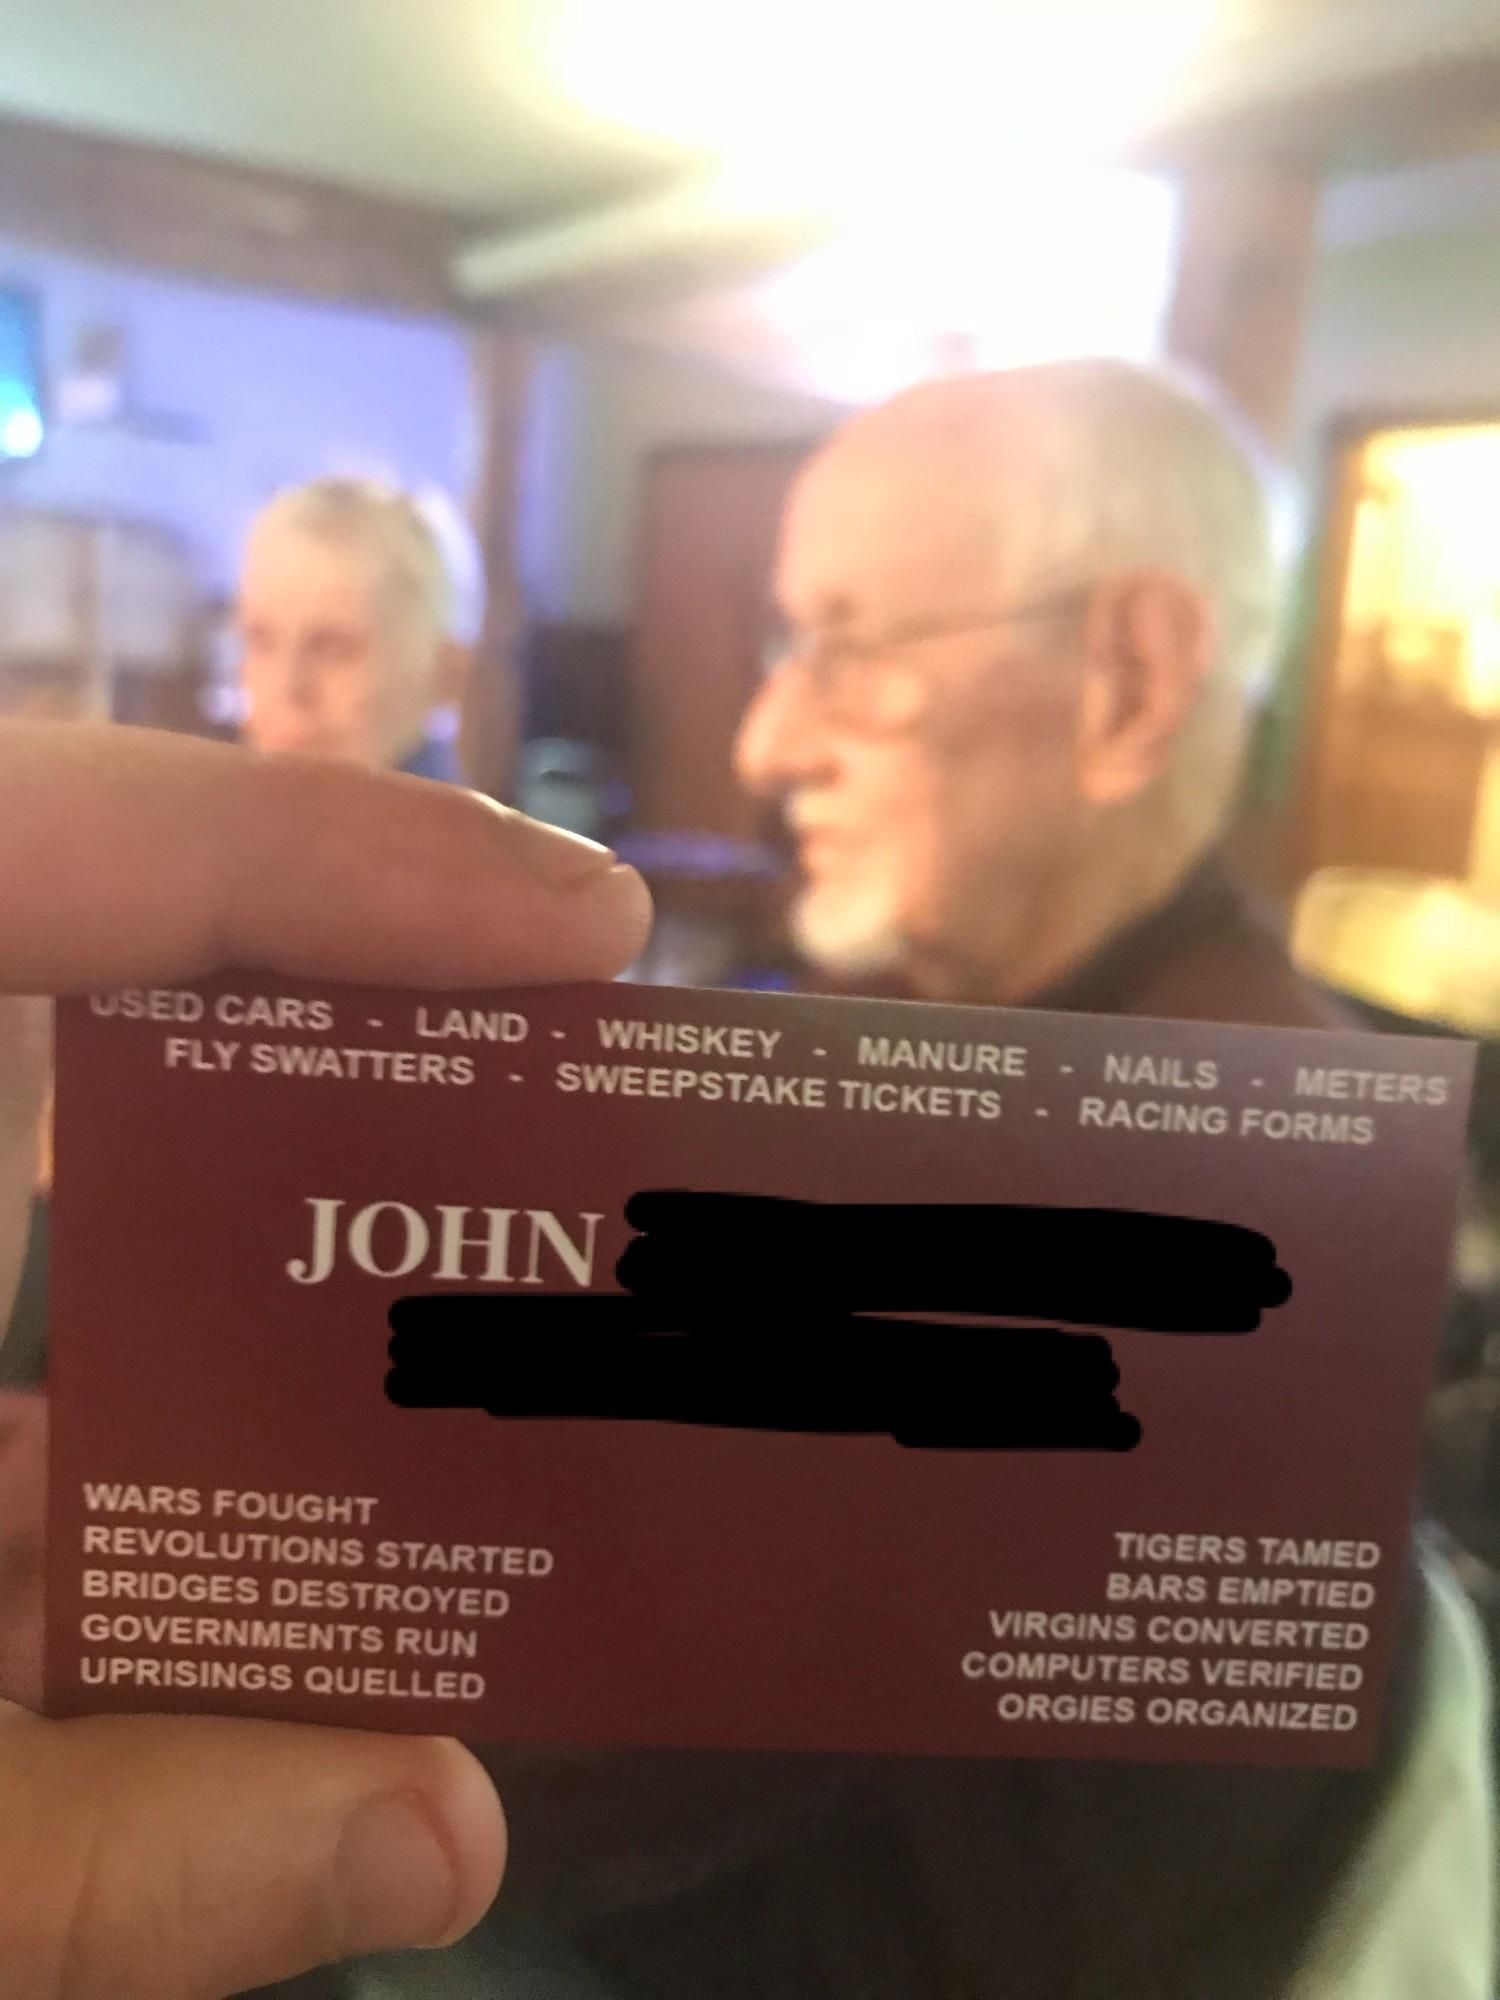 My Grandfather is retired and he still carries around these impressive business cards.